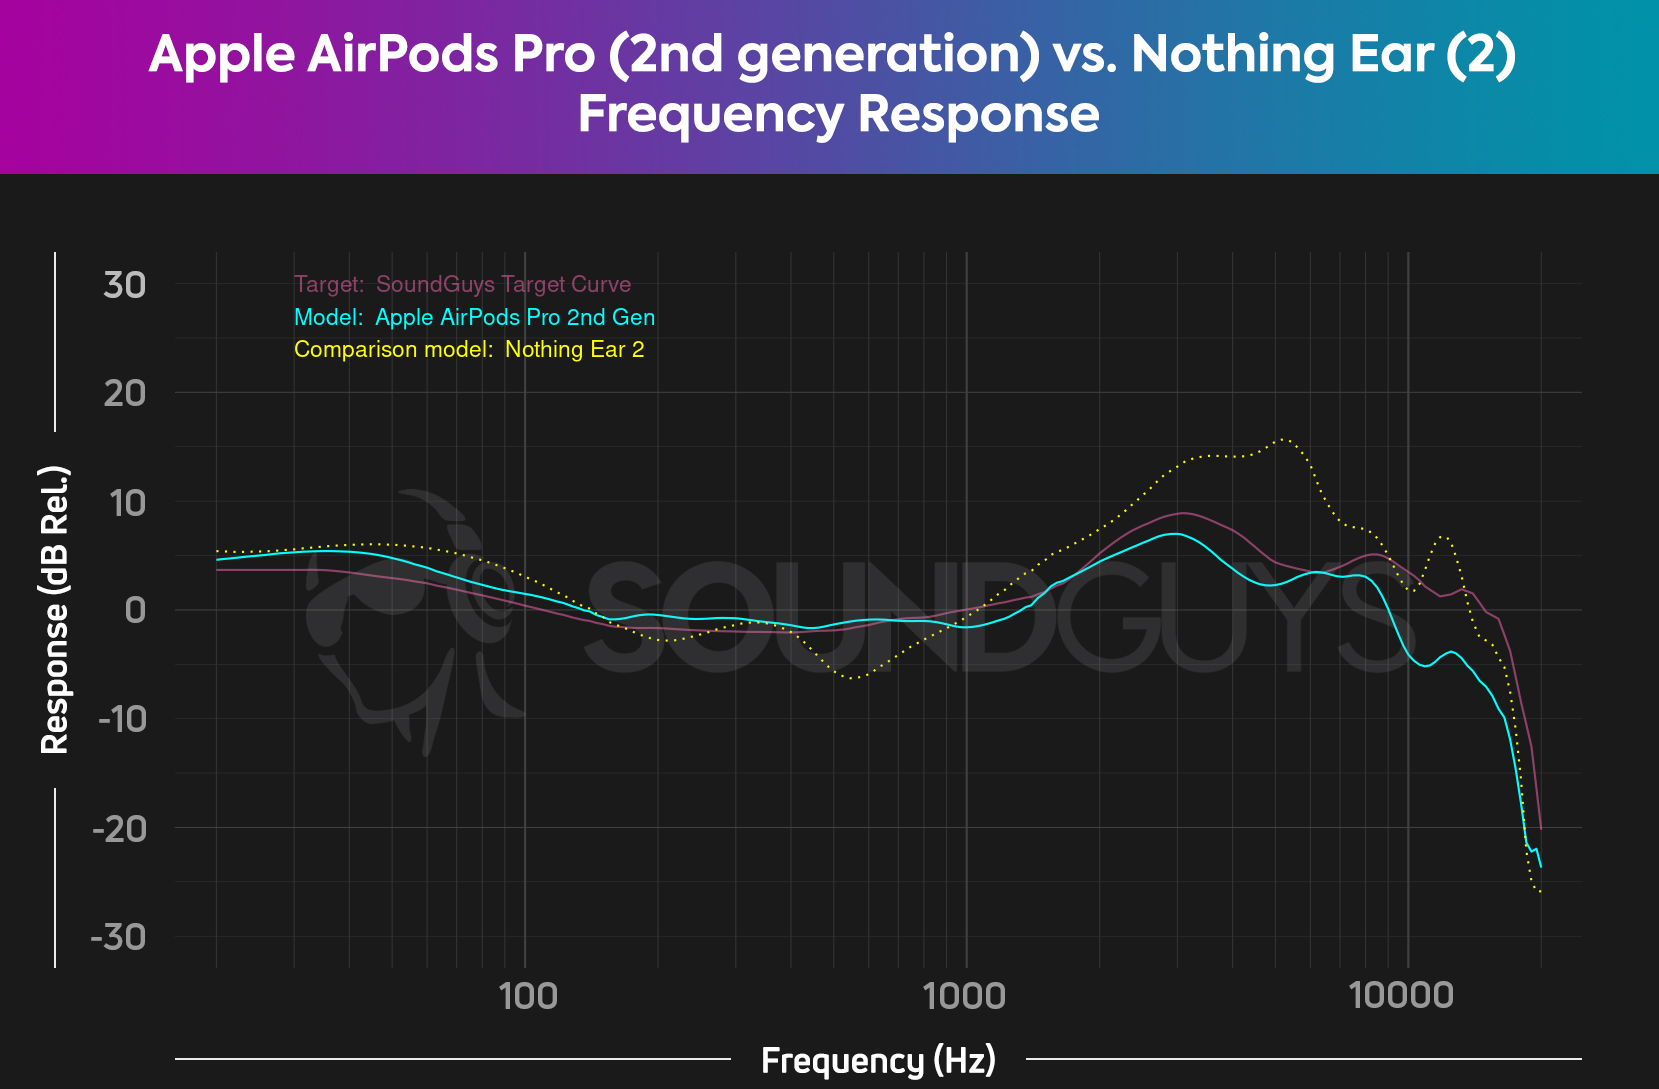 A chart showing the frequency responses of the Apple AirPods Pro (2nd generation) and Nothing Ear (2).